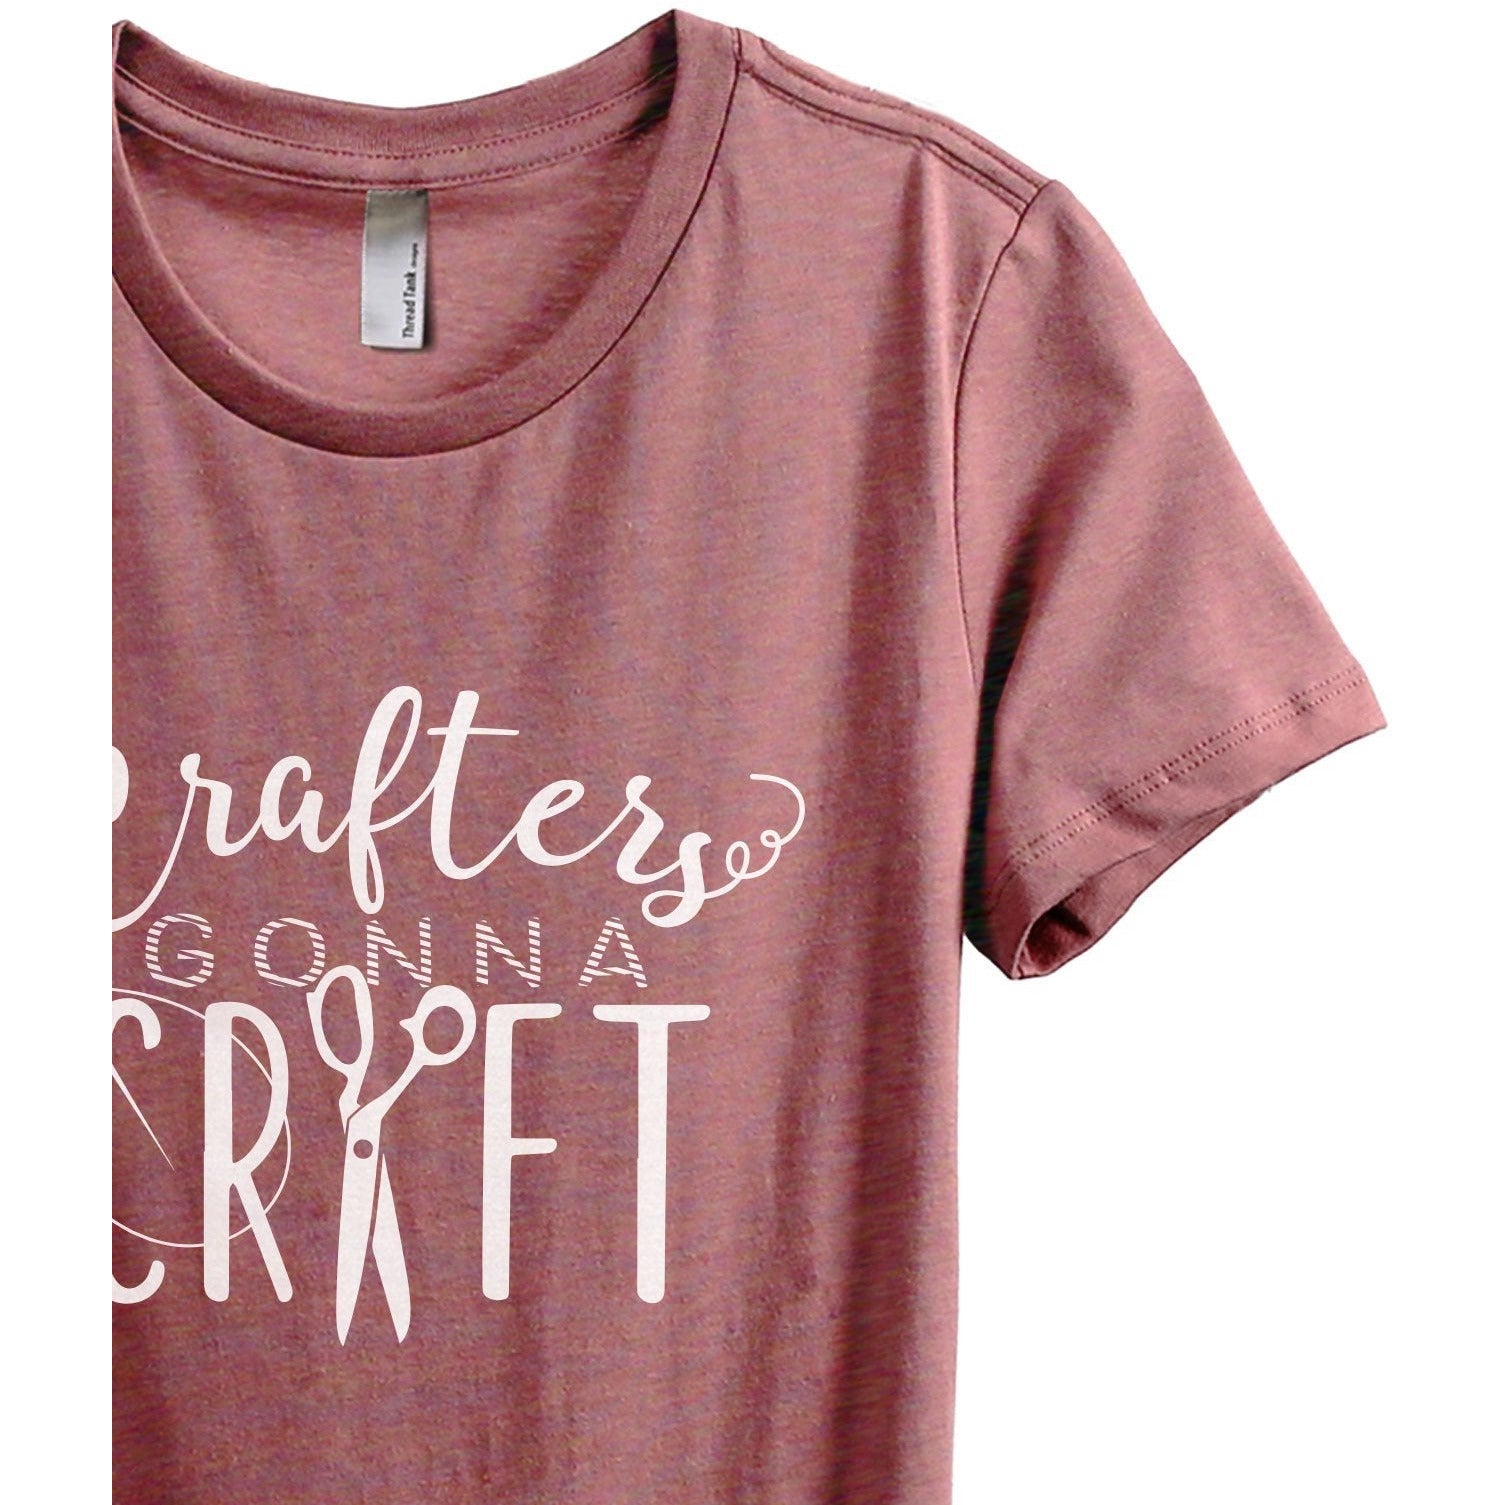 Crafters Gonna Craft Women's Relaxed Crewneck T-Shirt Top Tee Heather Rouge Zoom Details
